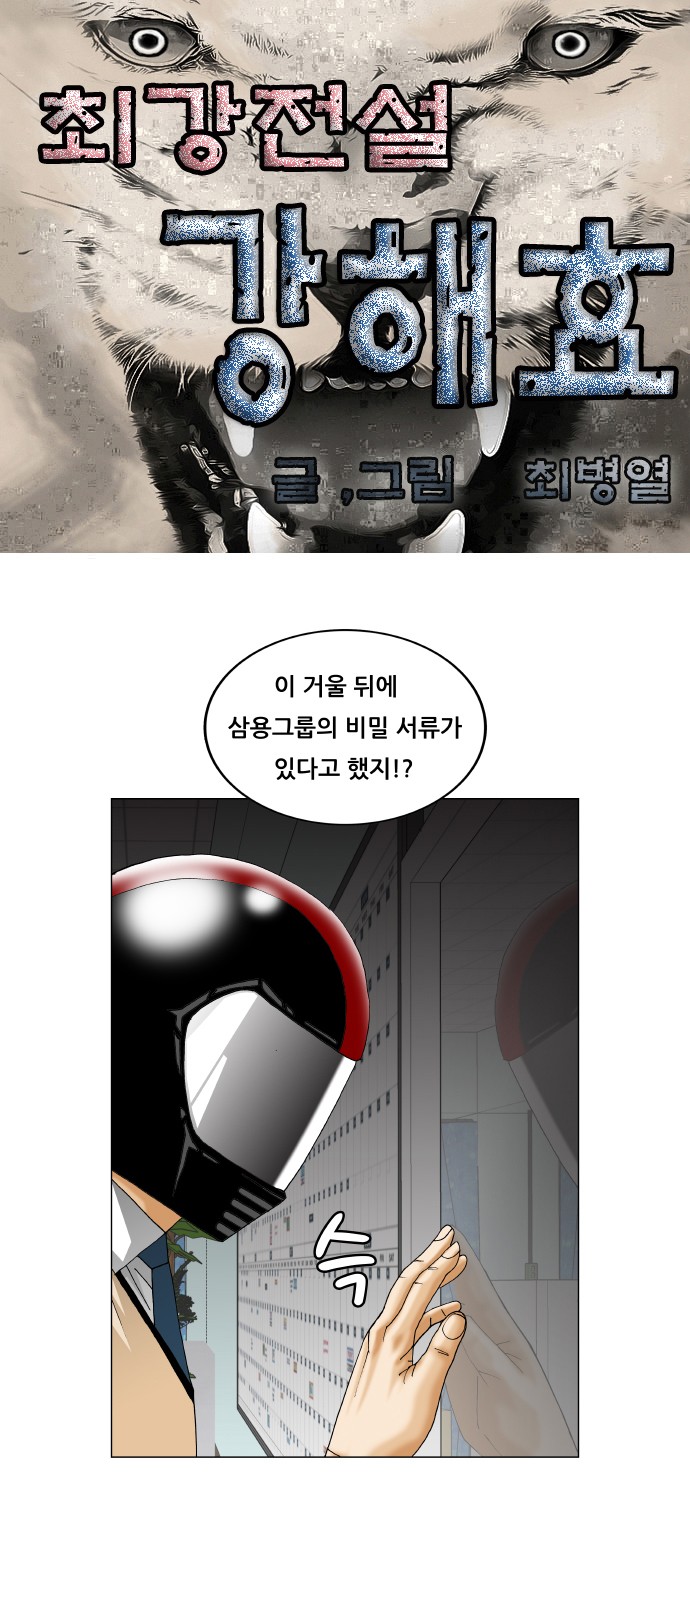 Ultimate Legend - Kang Hae Hyo - Chapter 249 - Page 1